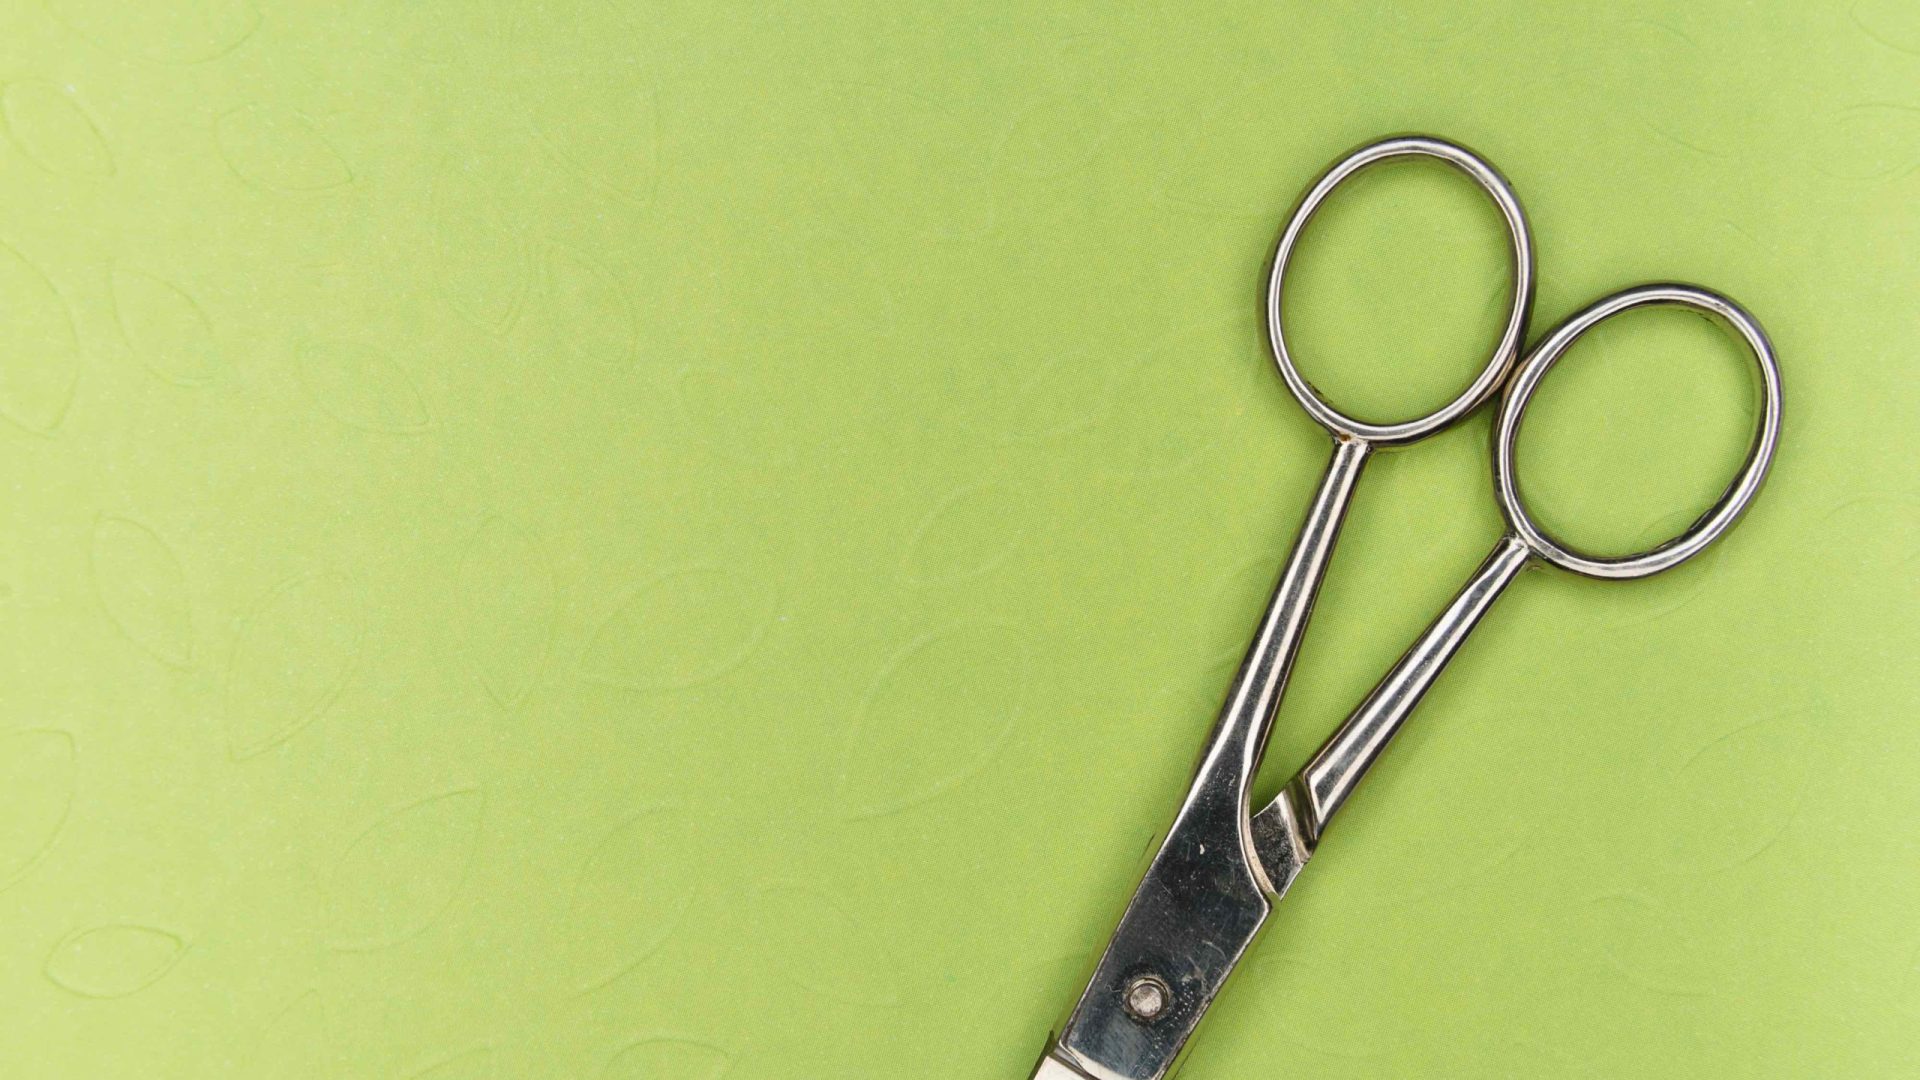 Scissors on a green background